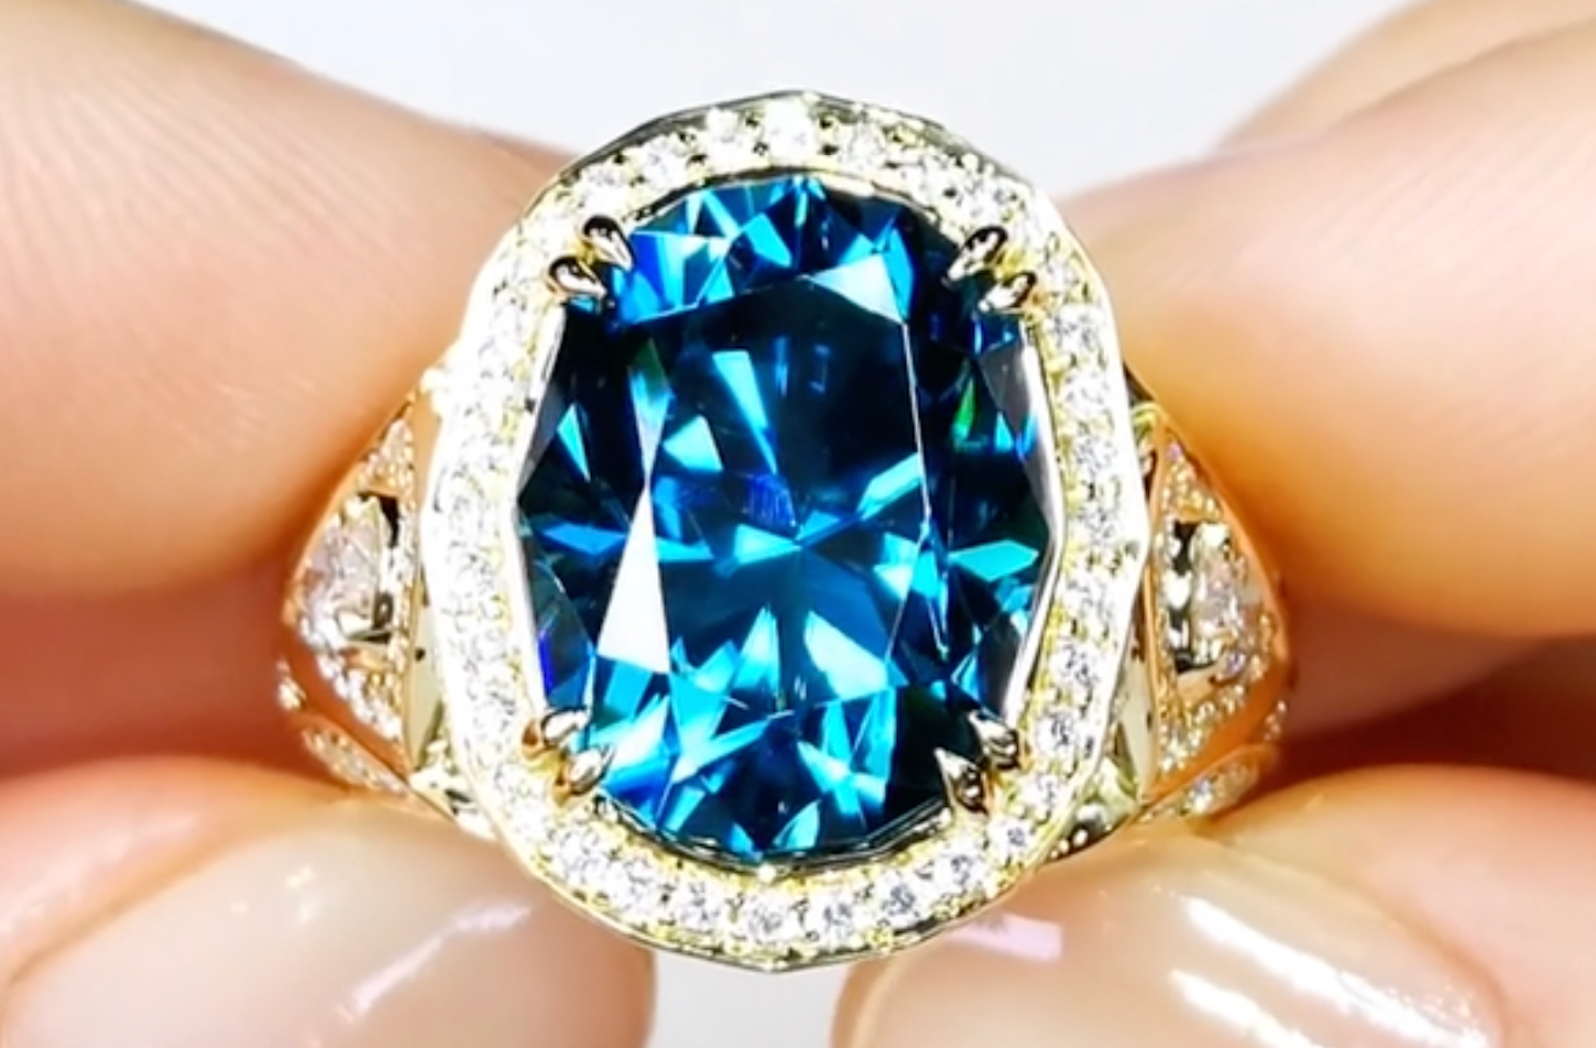 13.58ct Blue Zircon Ring with D Flawless Diamonds set in 18K Yellow Gold